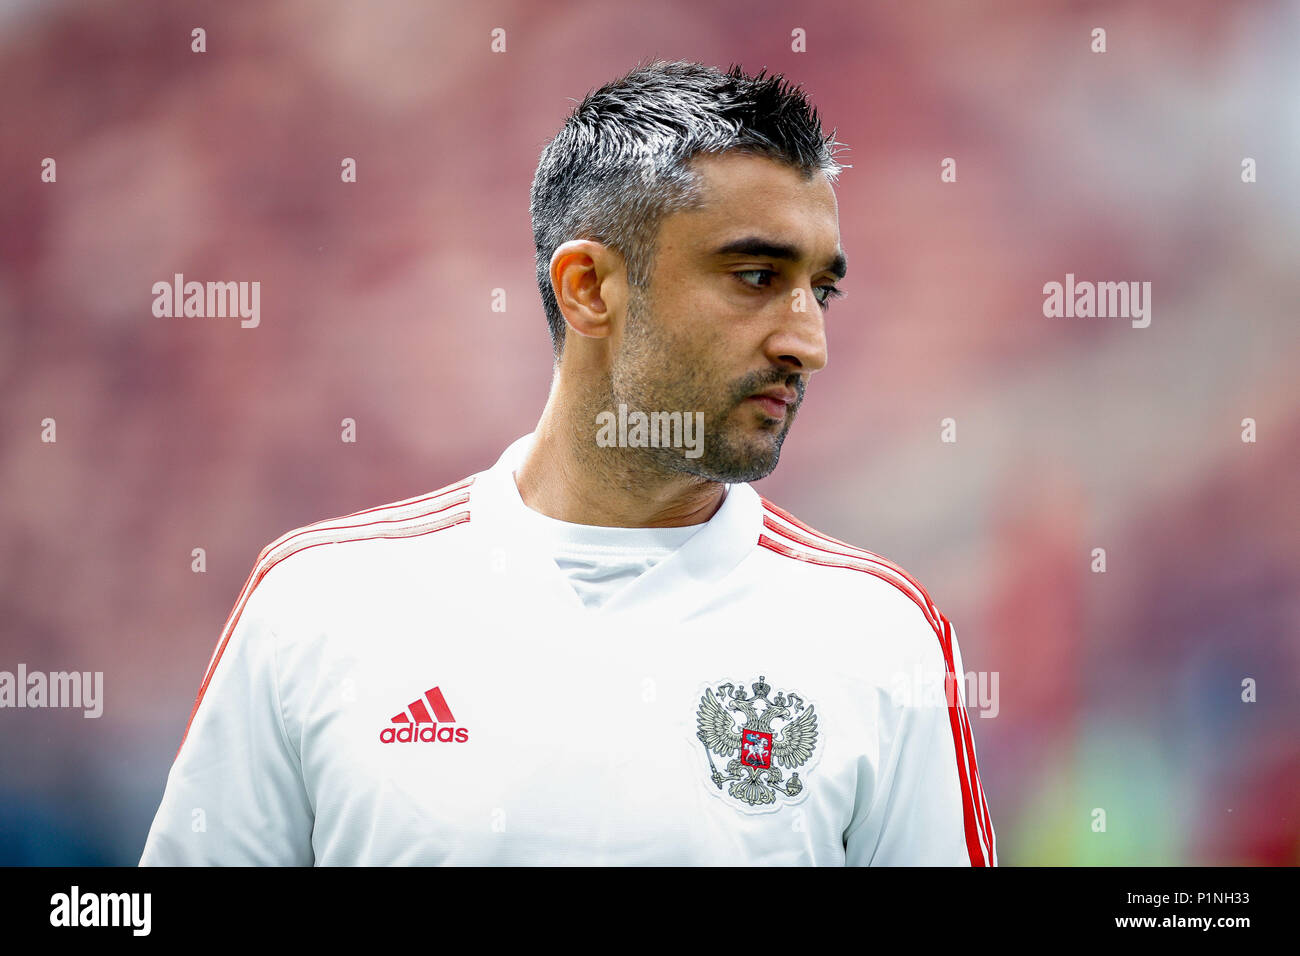 Moscow, Russia. 13th June 2018.  Aleksandr Samedov of Russia during the official training before the opening game of the 2018 FIFA World Cup between Russia and Saudi Arabia held at the Lujniki Stadium in Moscow, Russia. (Photo: Marcelo Machado de Melo/Fotoarena) Credit: Foto Arena LTDA/Alamy Live News Stock Photo